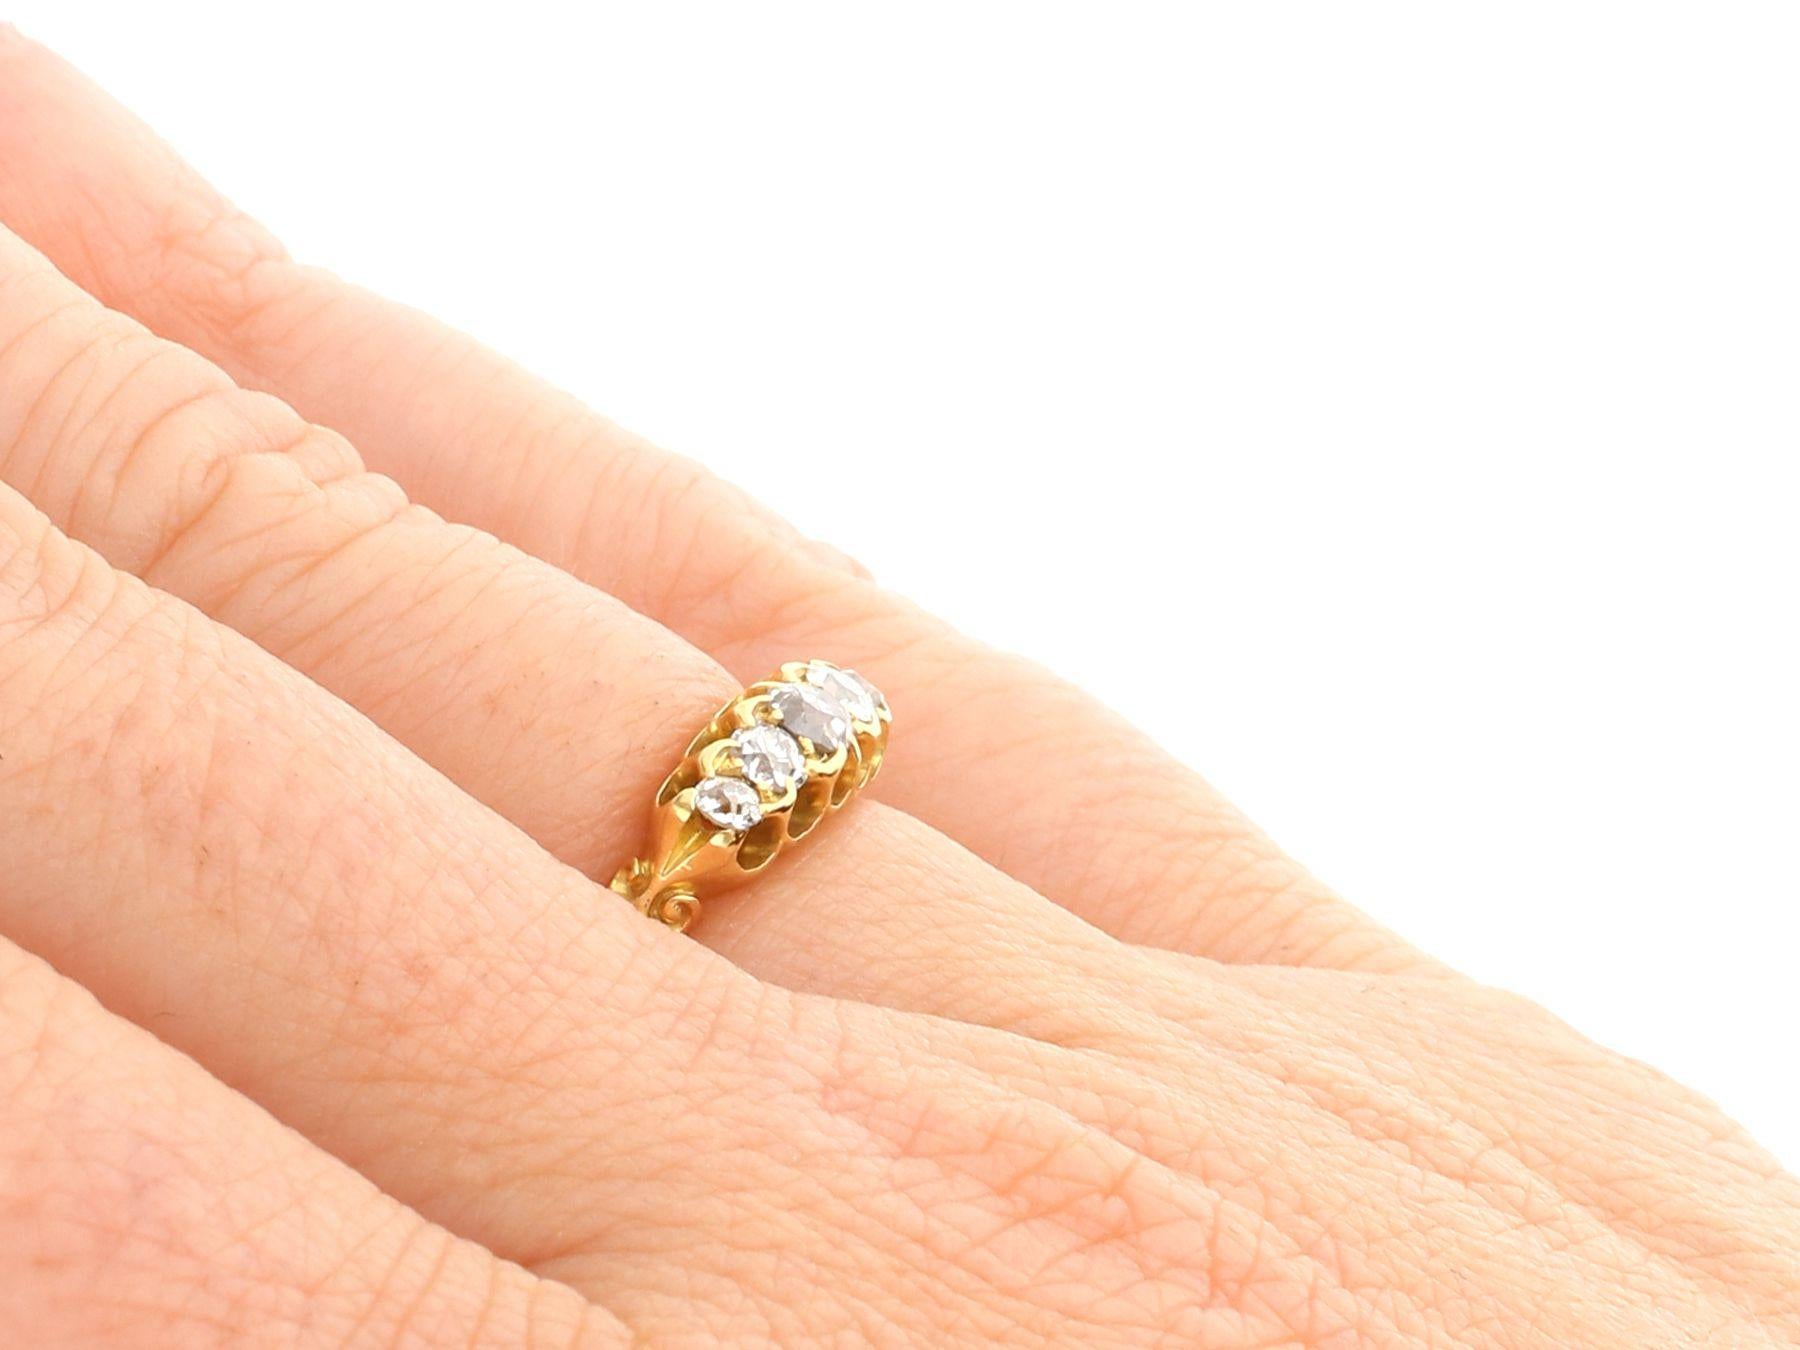 Victorian 0.66 Carat Diamond and 18k Yellow Gold Five Stone Ring In Excellent Condition For Sale In Jesmond, Newcastle Upon Tyne